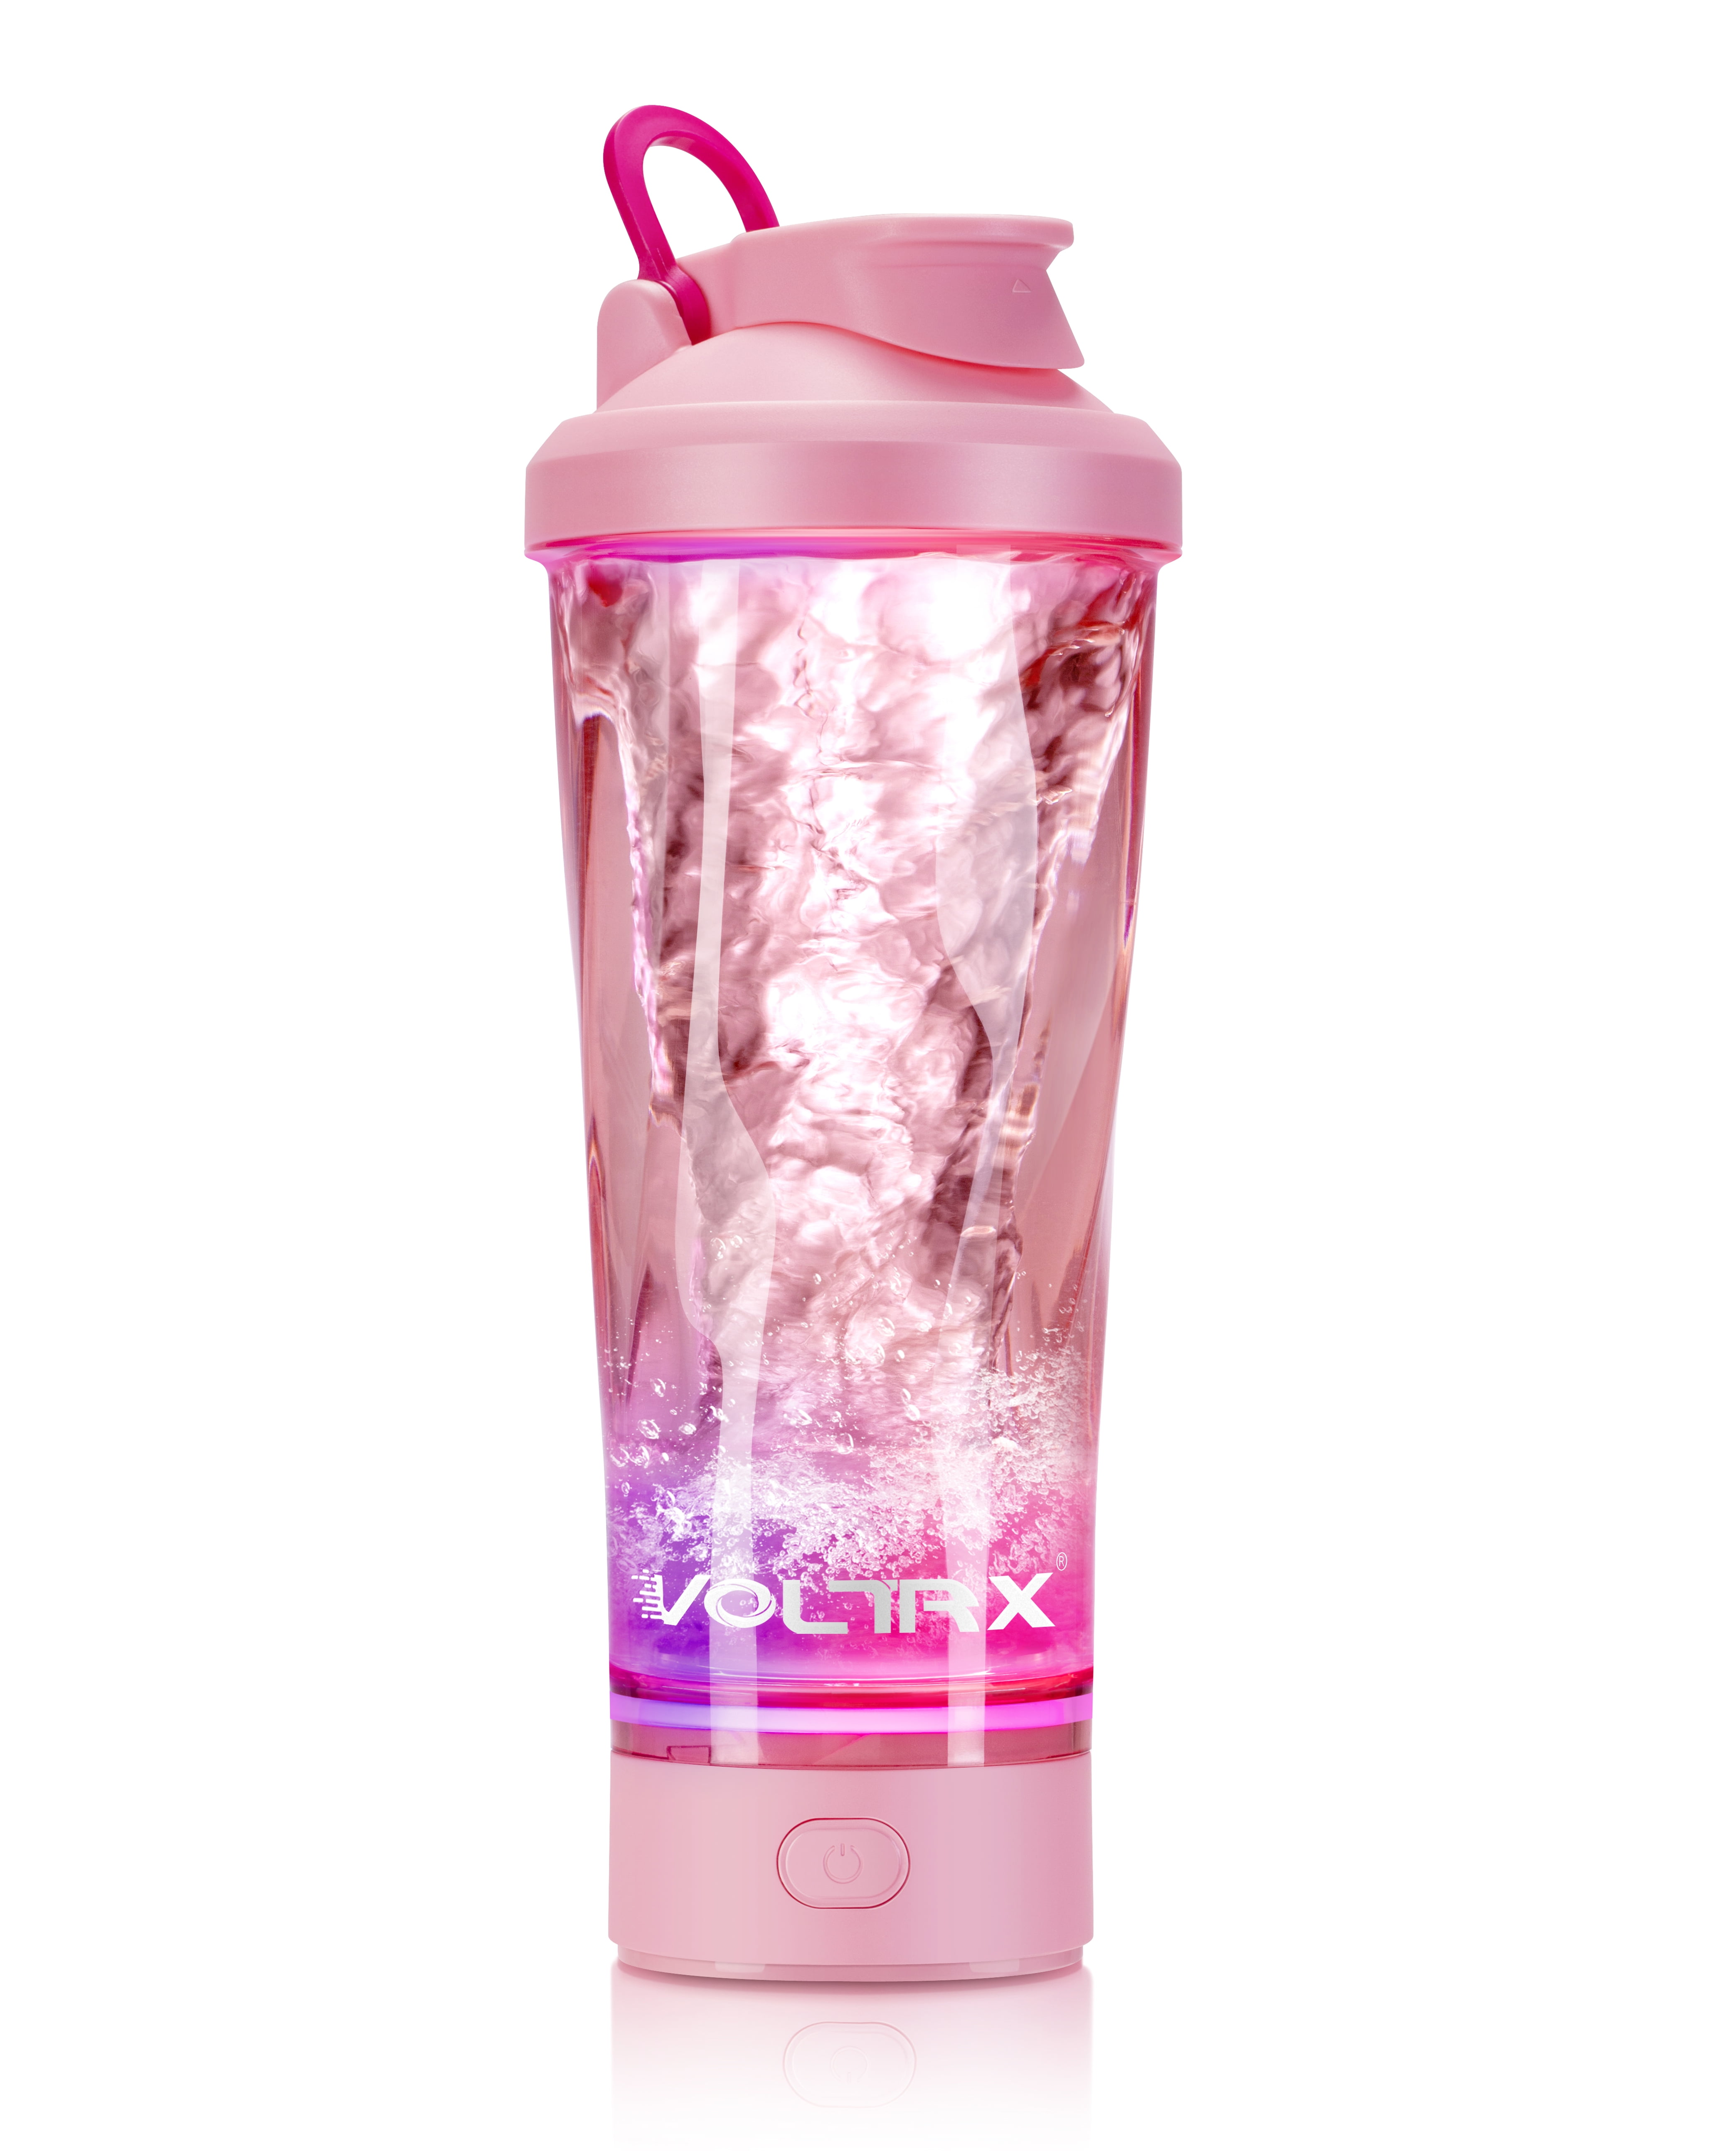 VOLTRX Electric Shaker Bottle - VortexBoost Portable USB C Rechargeable Protein  Shake Mixer, Shaker Cups for Protein Shakes and Meal Replacement Shakes,  BPA Free, Waterproof, Colored Light Base, 24 oz 